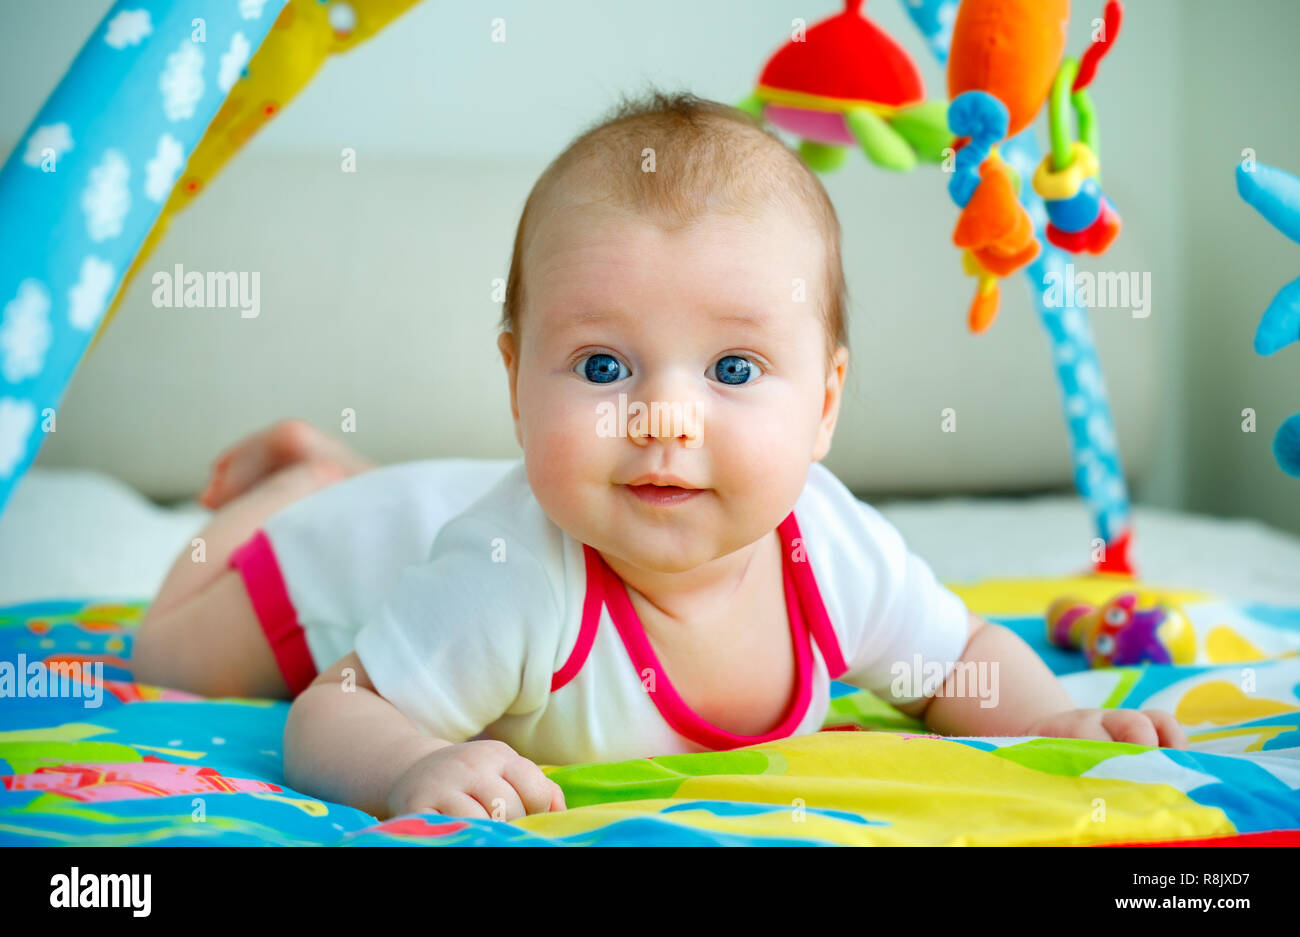 Adorable baby girl having fun with toys on colorful play mat Stock Photo